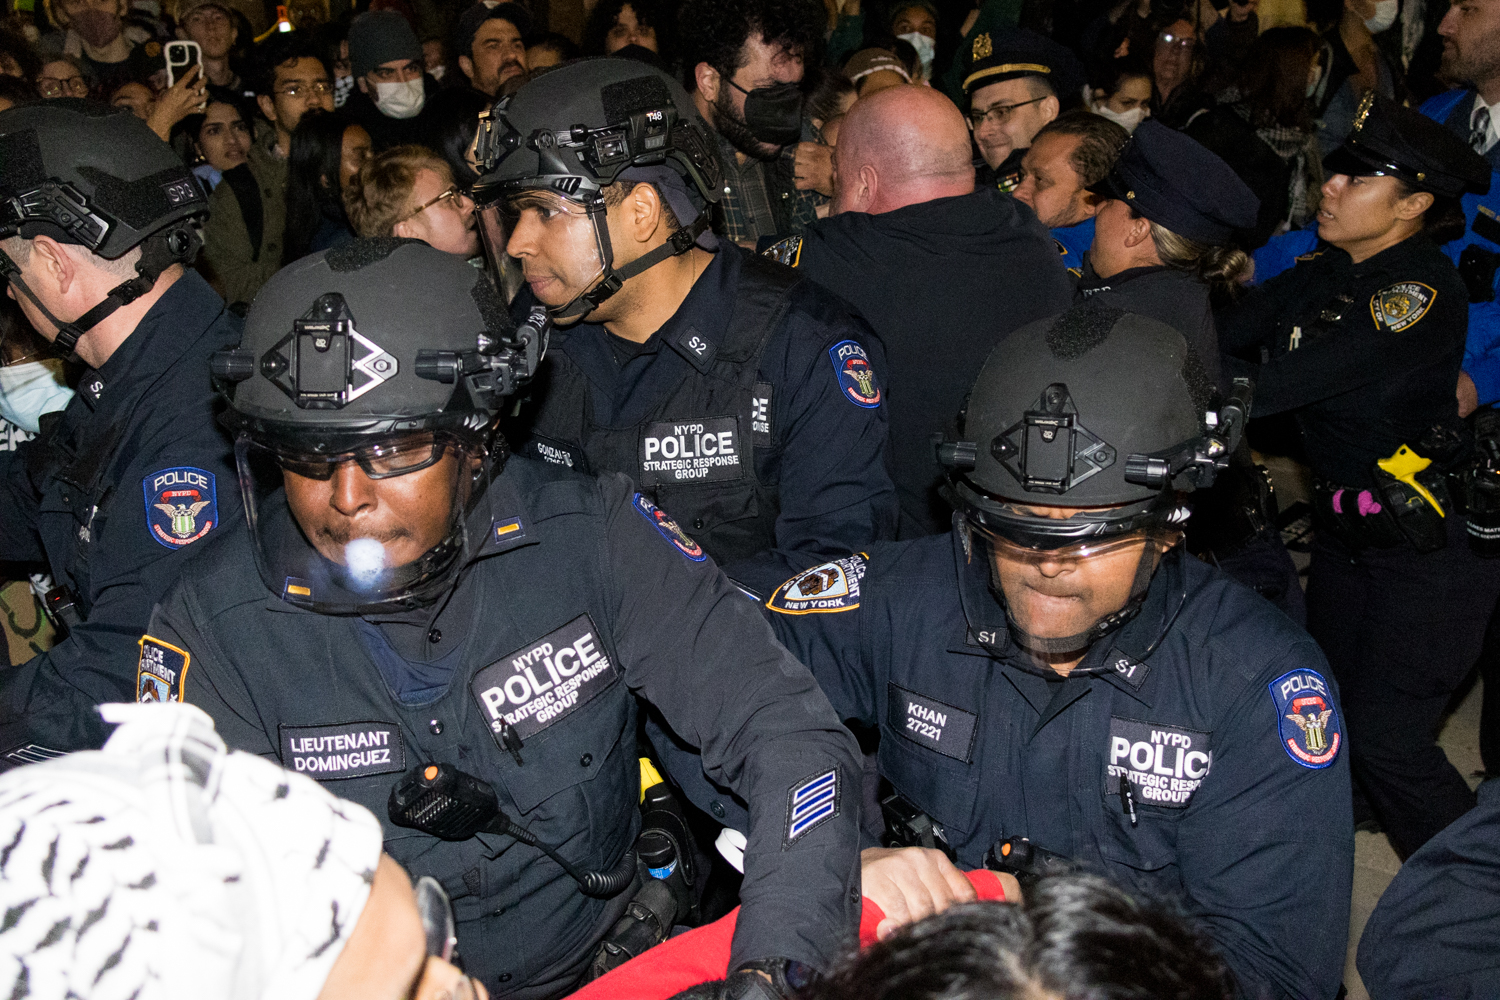 Dozens+arrested+after+NYU+authorizes+NYPD+to+sweep+Gould+Plaza